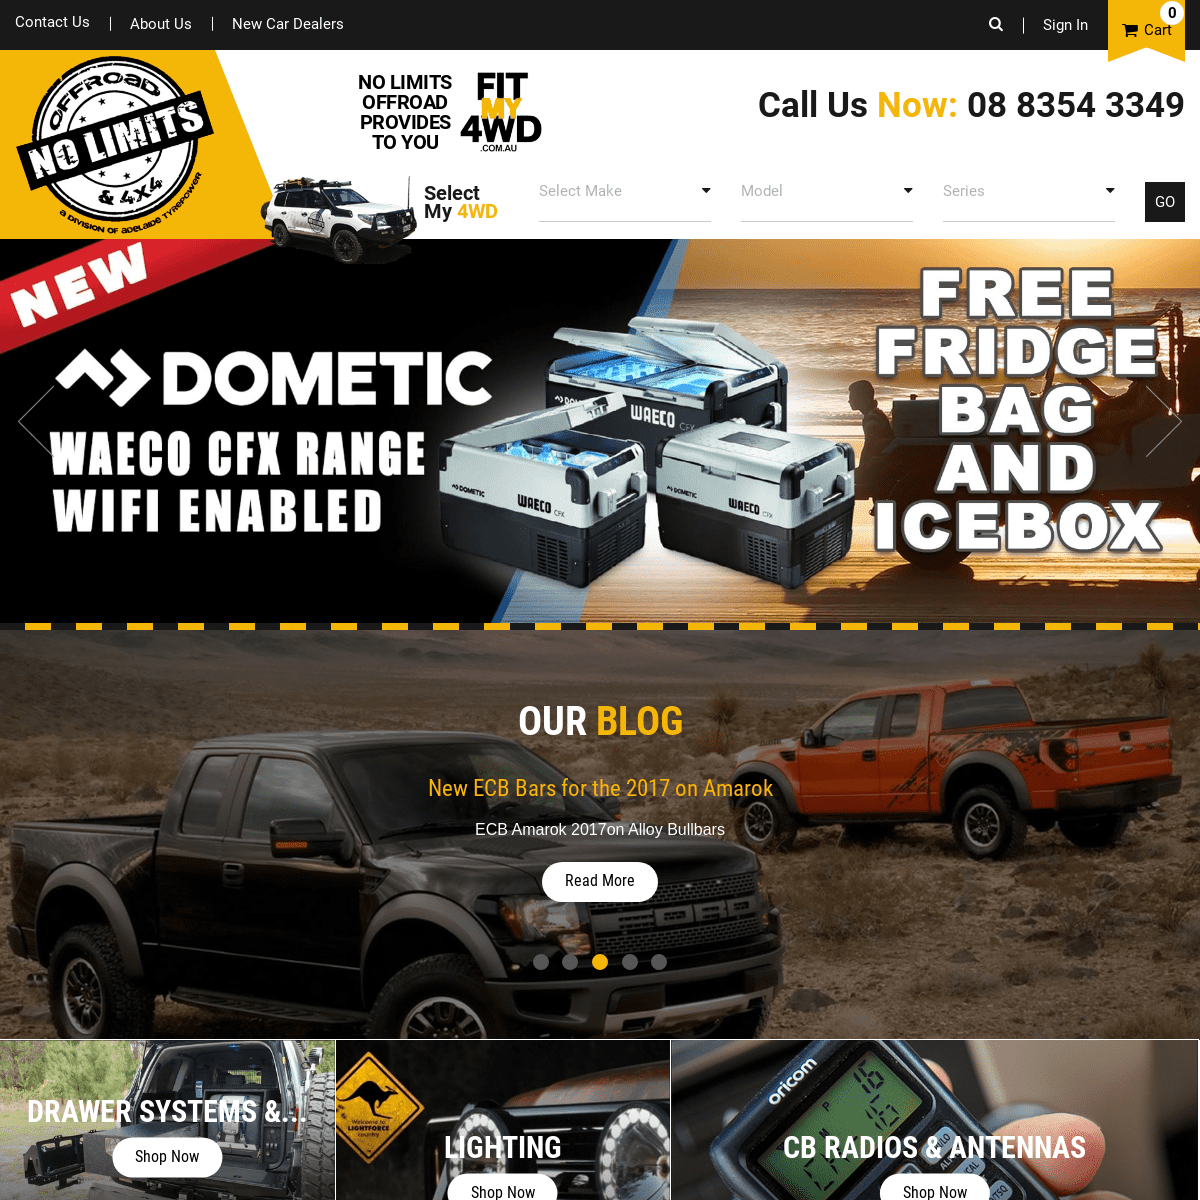 A complete backup of fitmy4wd.com.au